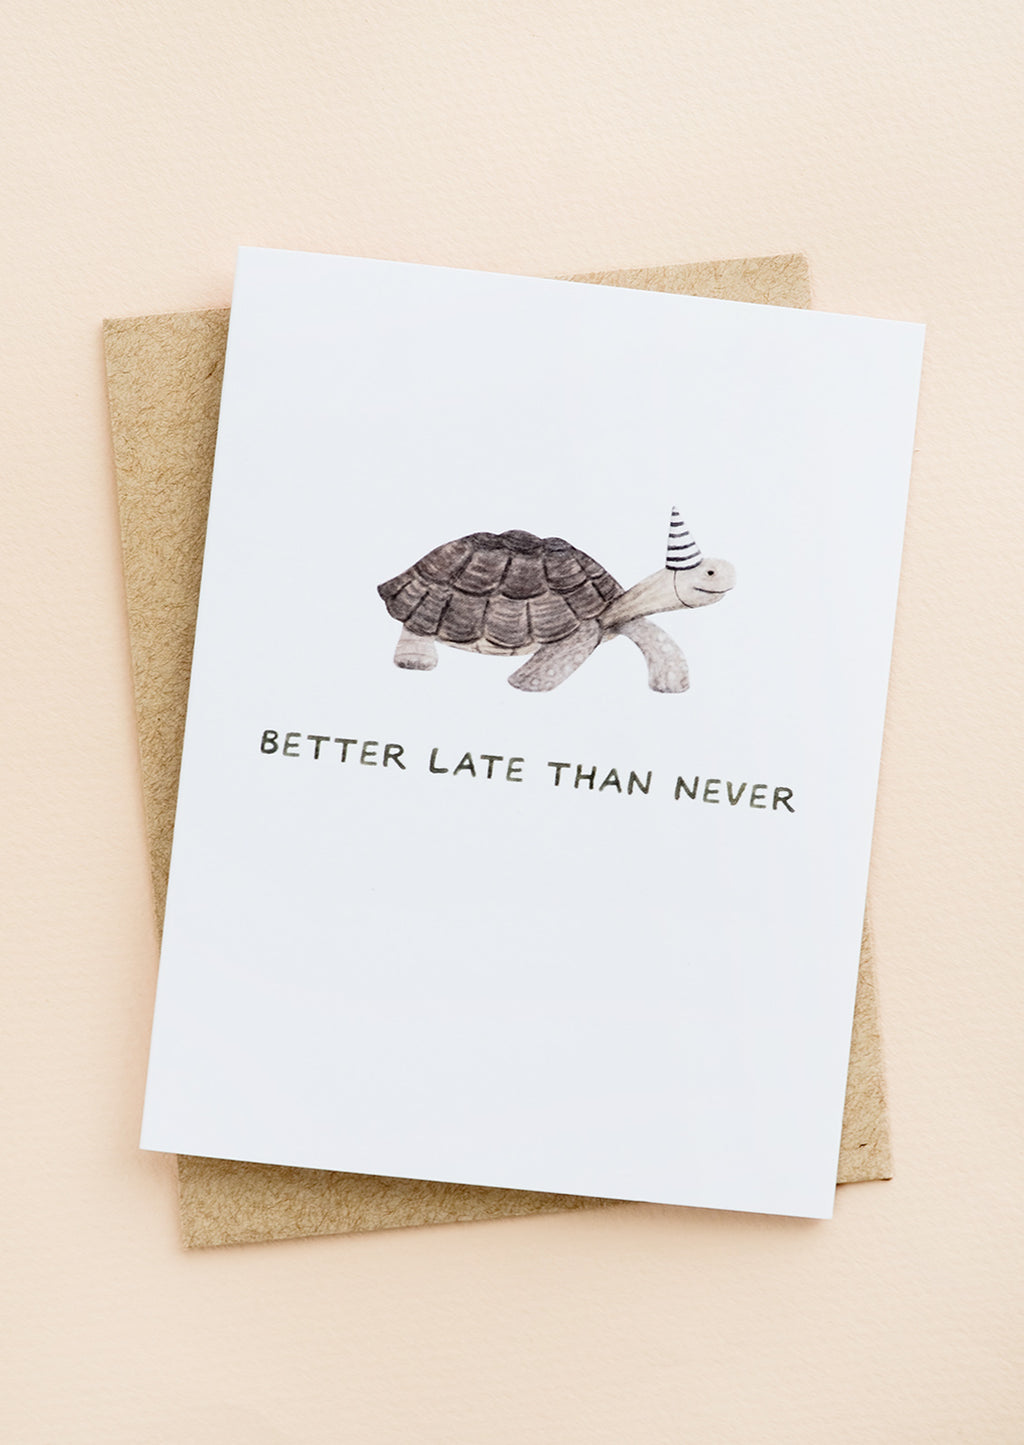 1: A greeting card with illustration of a tortoise in a party hat, text underneath reads "Better late than never".